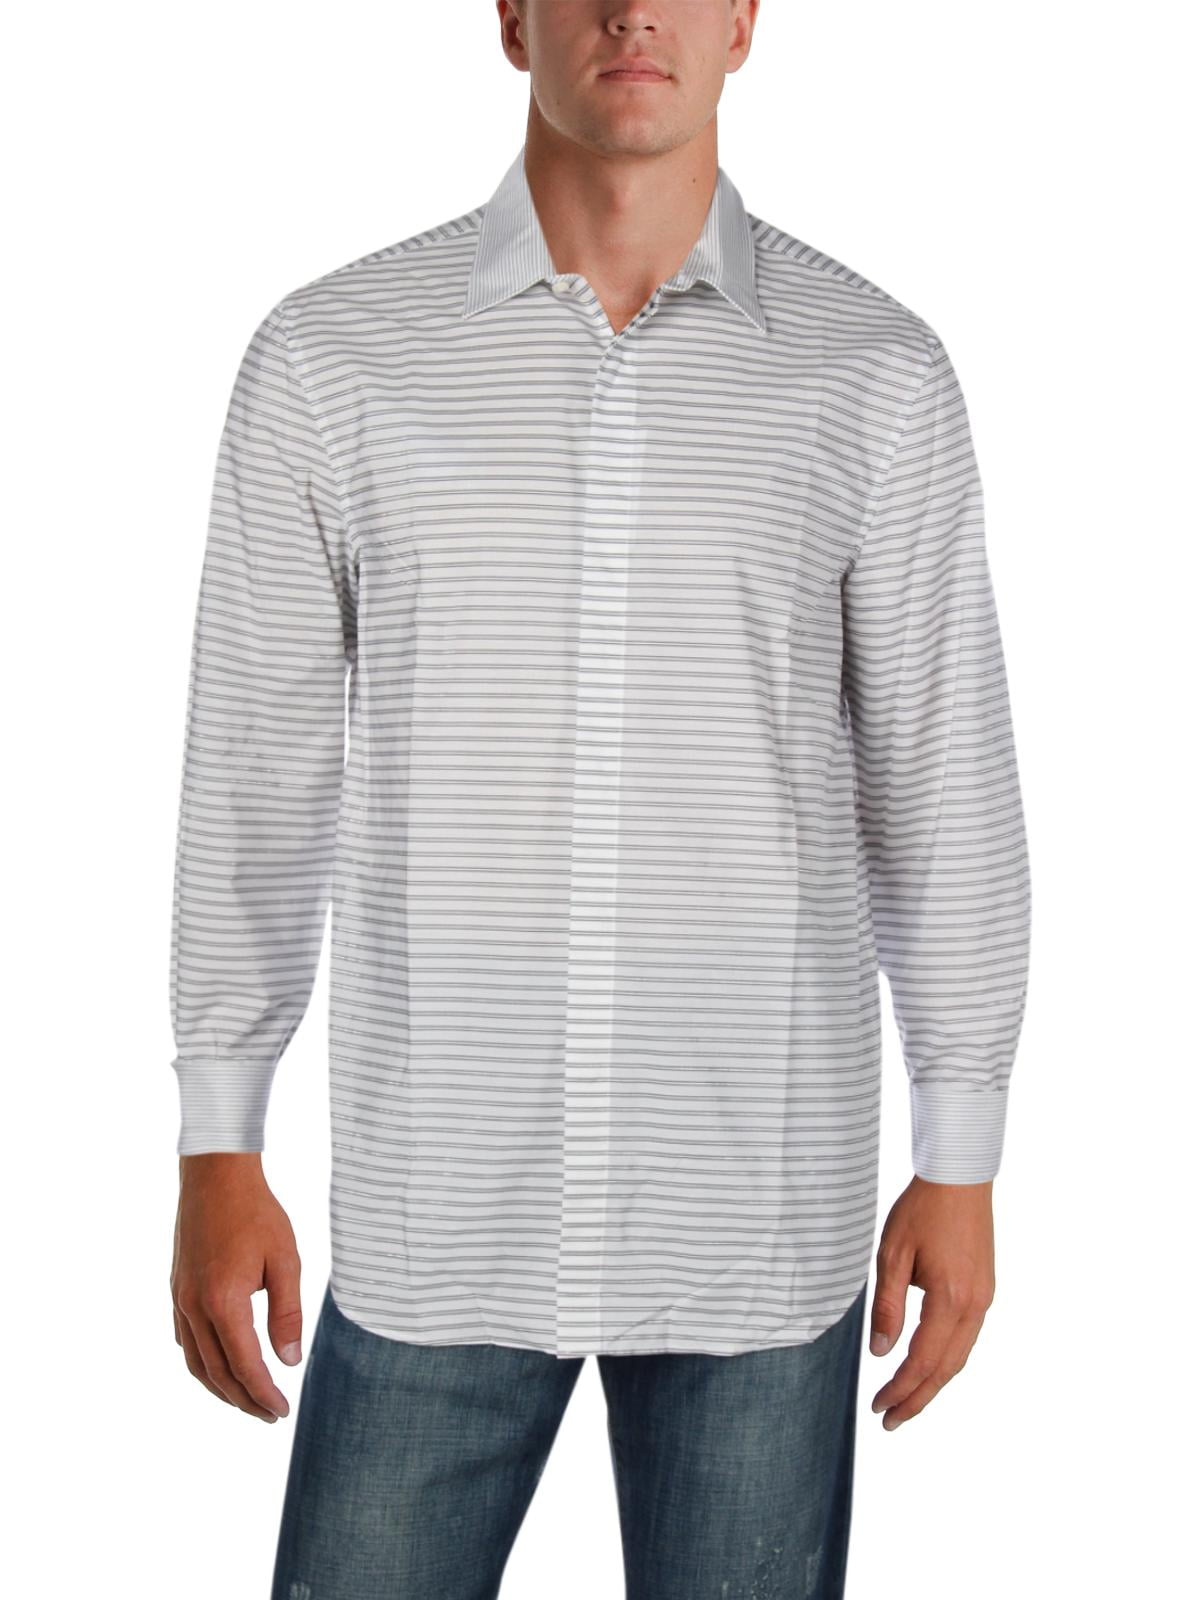 Perry Ellis Mens Striped Button Up Shirt 